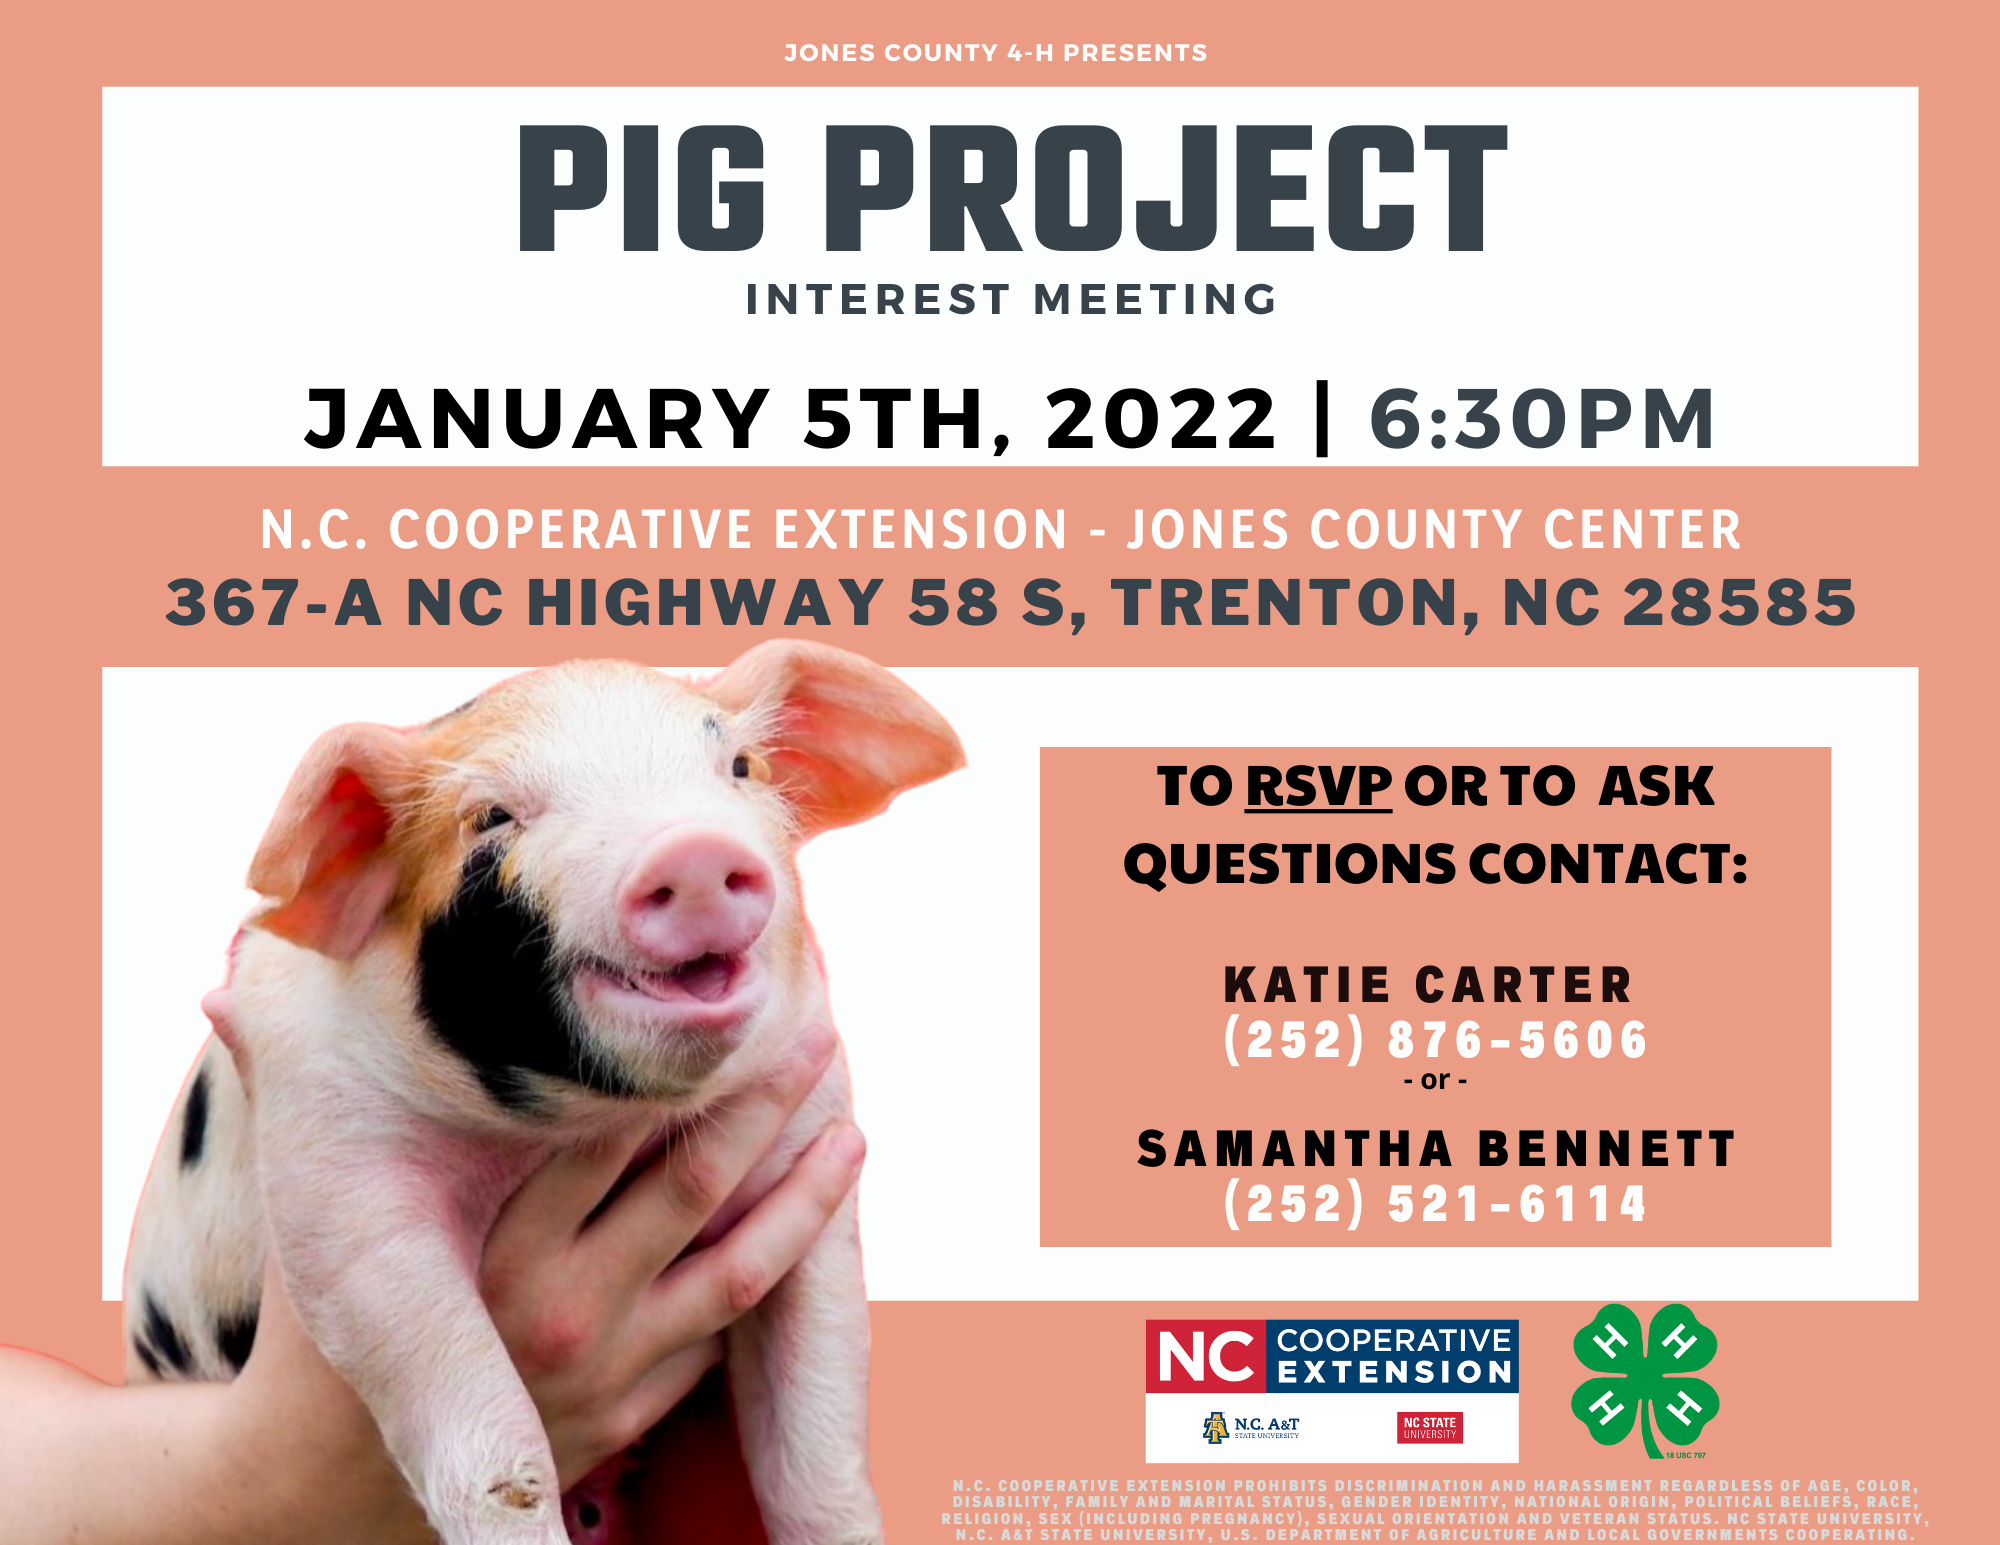 Jones County 4-H presents: Pig Project Interest Meeting. Jan. 5th, 2022 at 6:30 p.m. at N.C. Cooperative Extension's Jones County Center (367-A NC Highway 58 S, Trenton, NC 28585). MUST RSVP! To RSVP and ask questions contact Katie Carter at 252-876-5606 or Samantha Bennett at 252-521-6114.